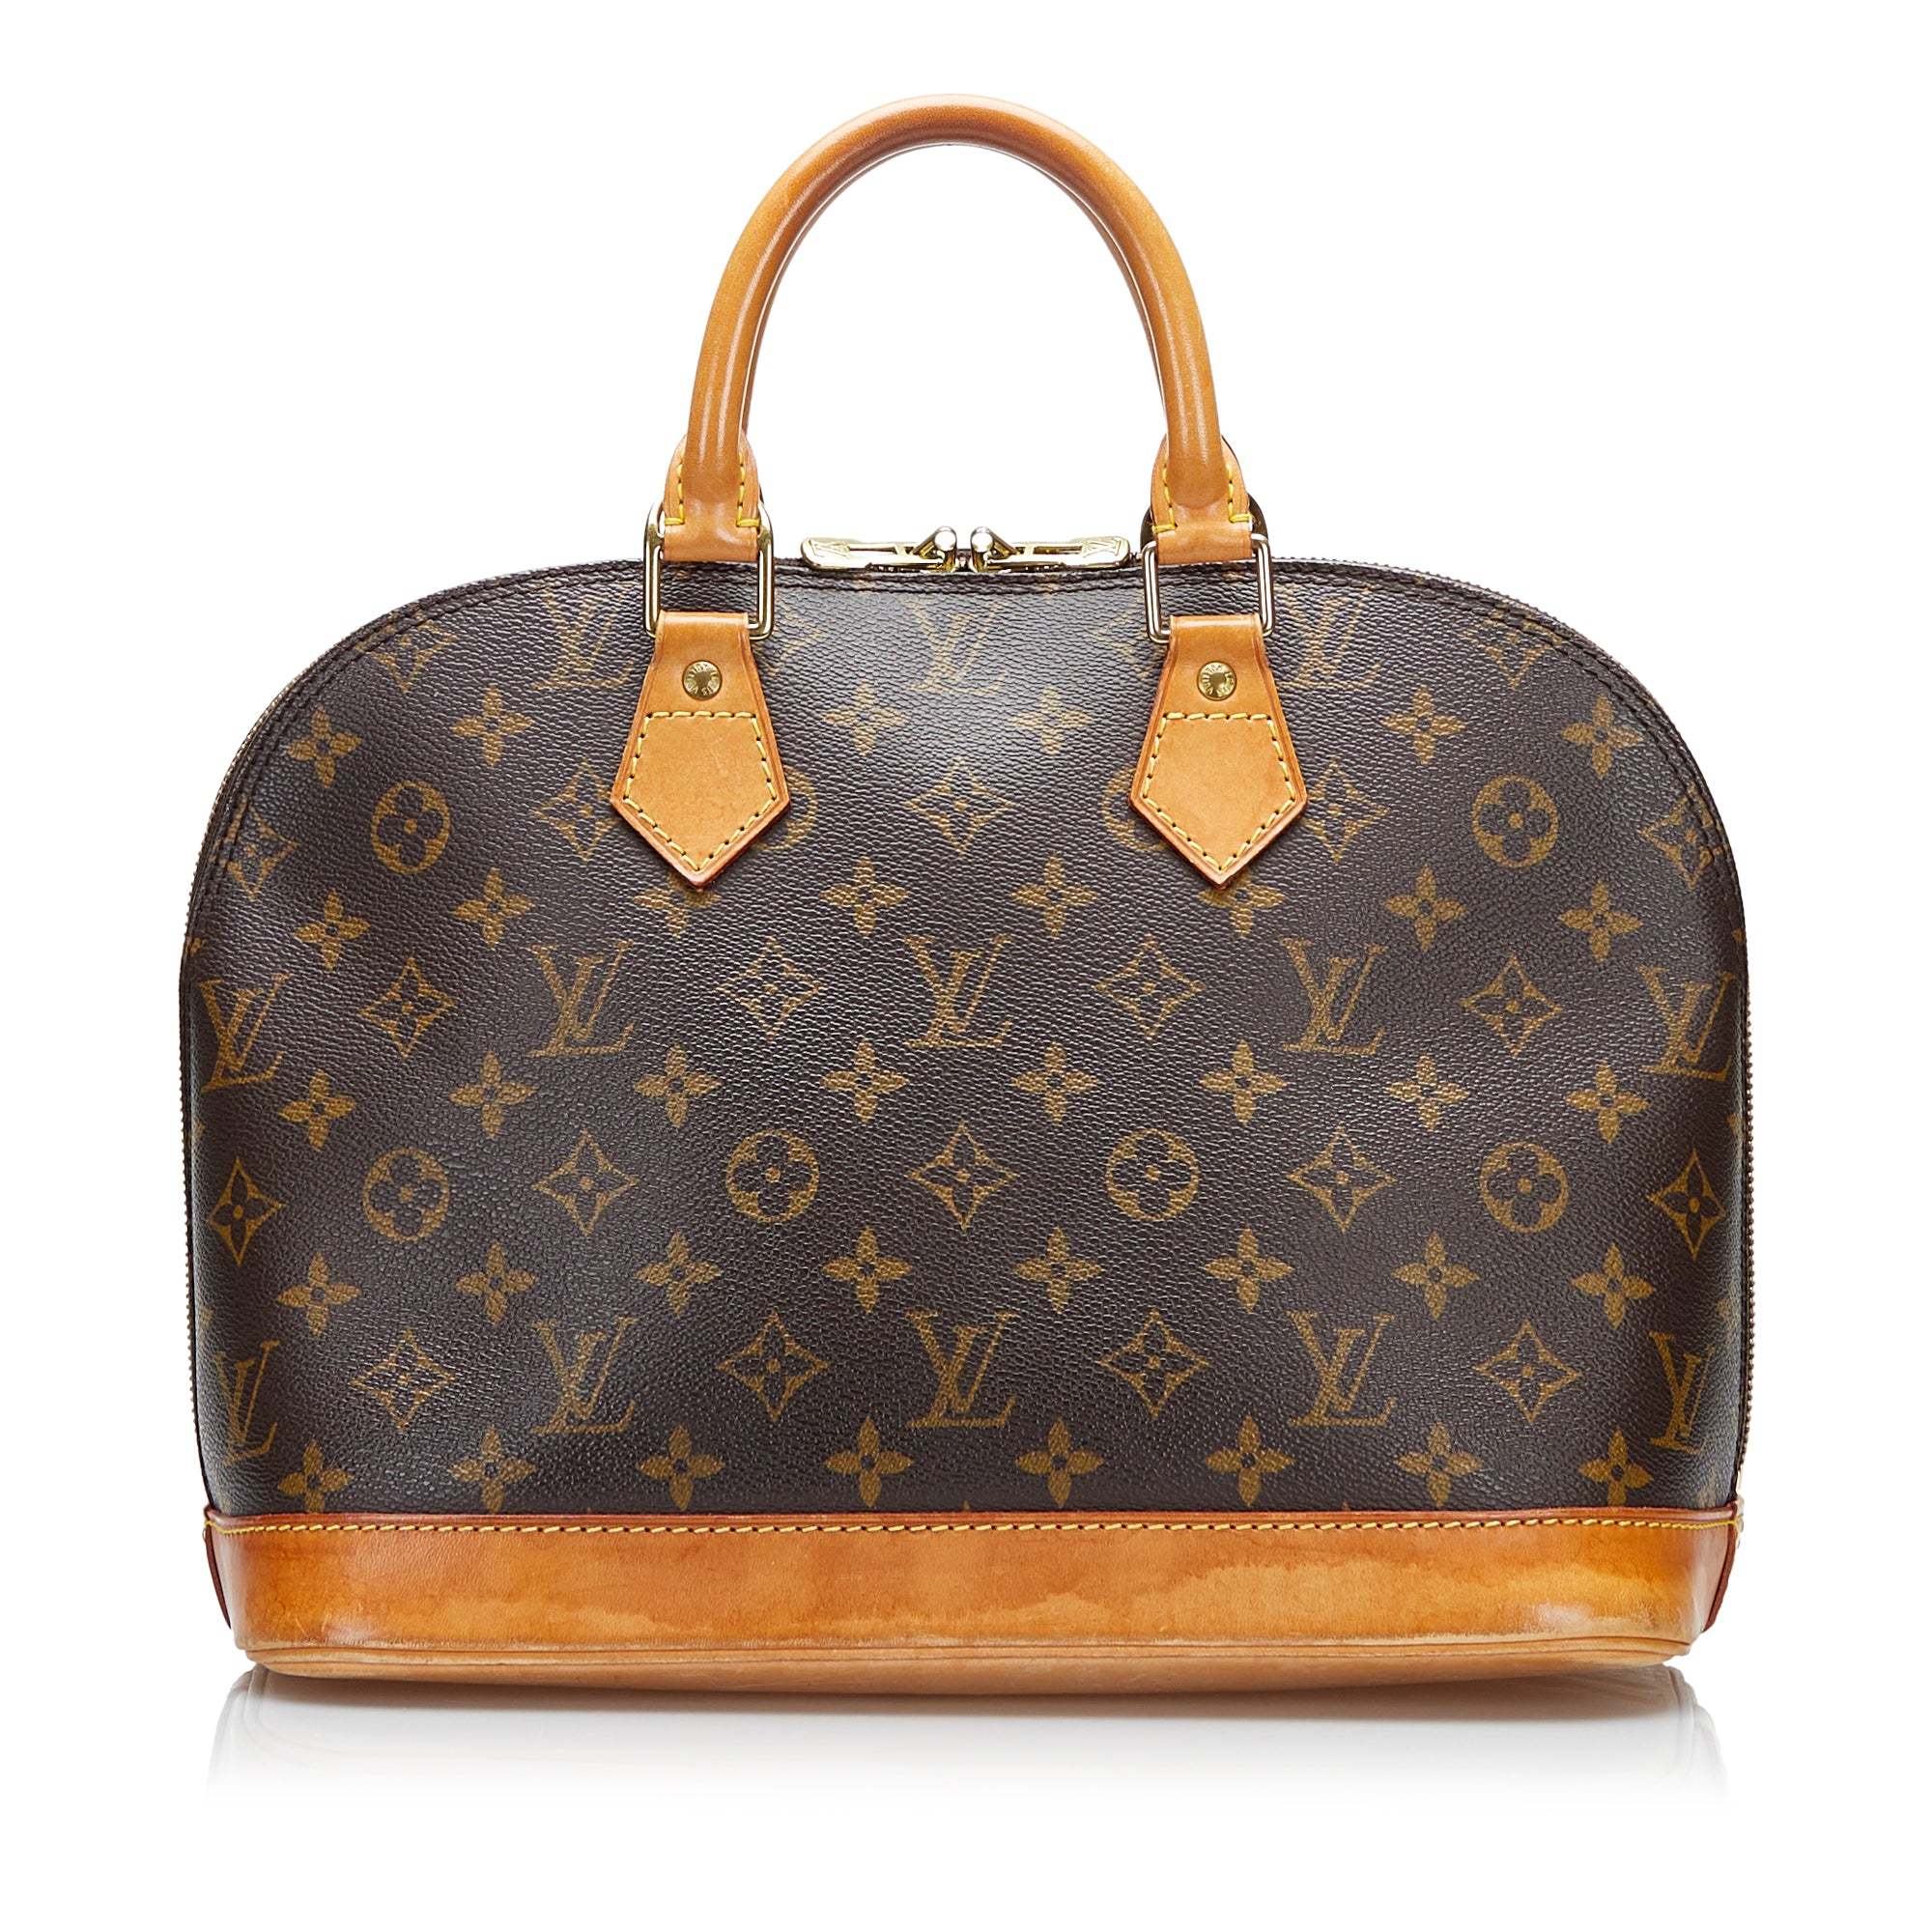 Products by Louis Vuitton: Alma BB  Louis vuitton alma bb, Louis vuitton  alma, Louis vuitton